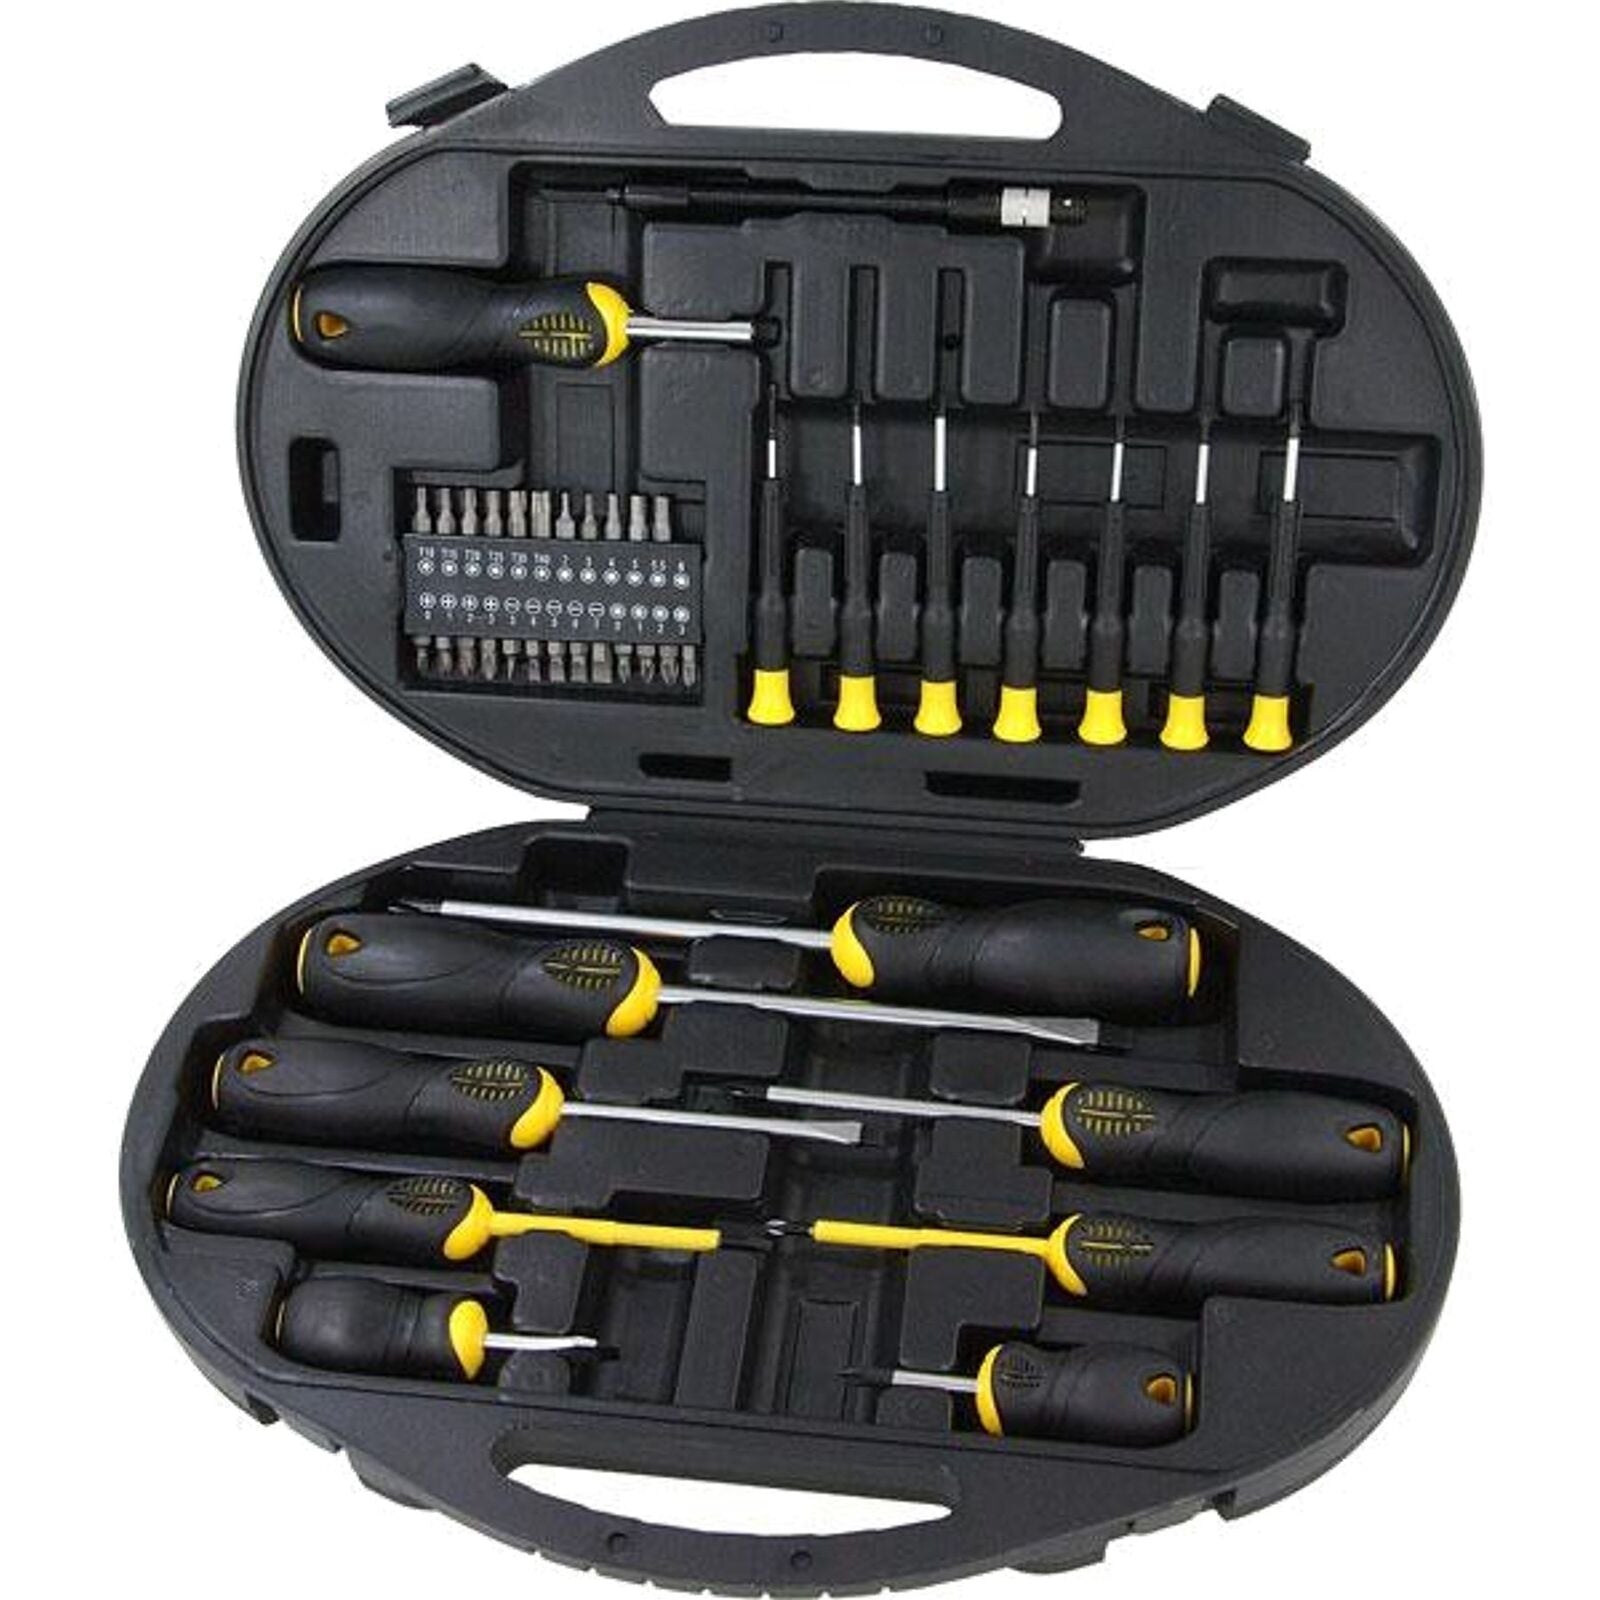 Jobsite Screwdriver Set Precision Hex Pozi Flat Slotted Magnetic Tip 42pc